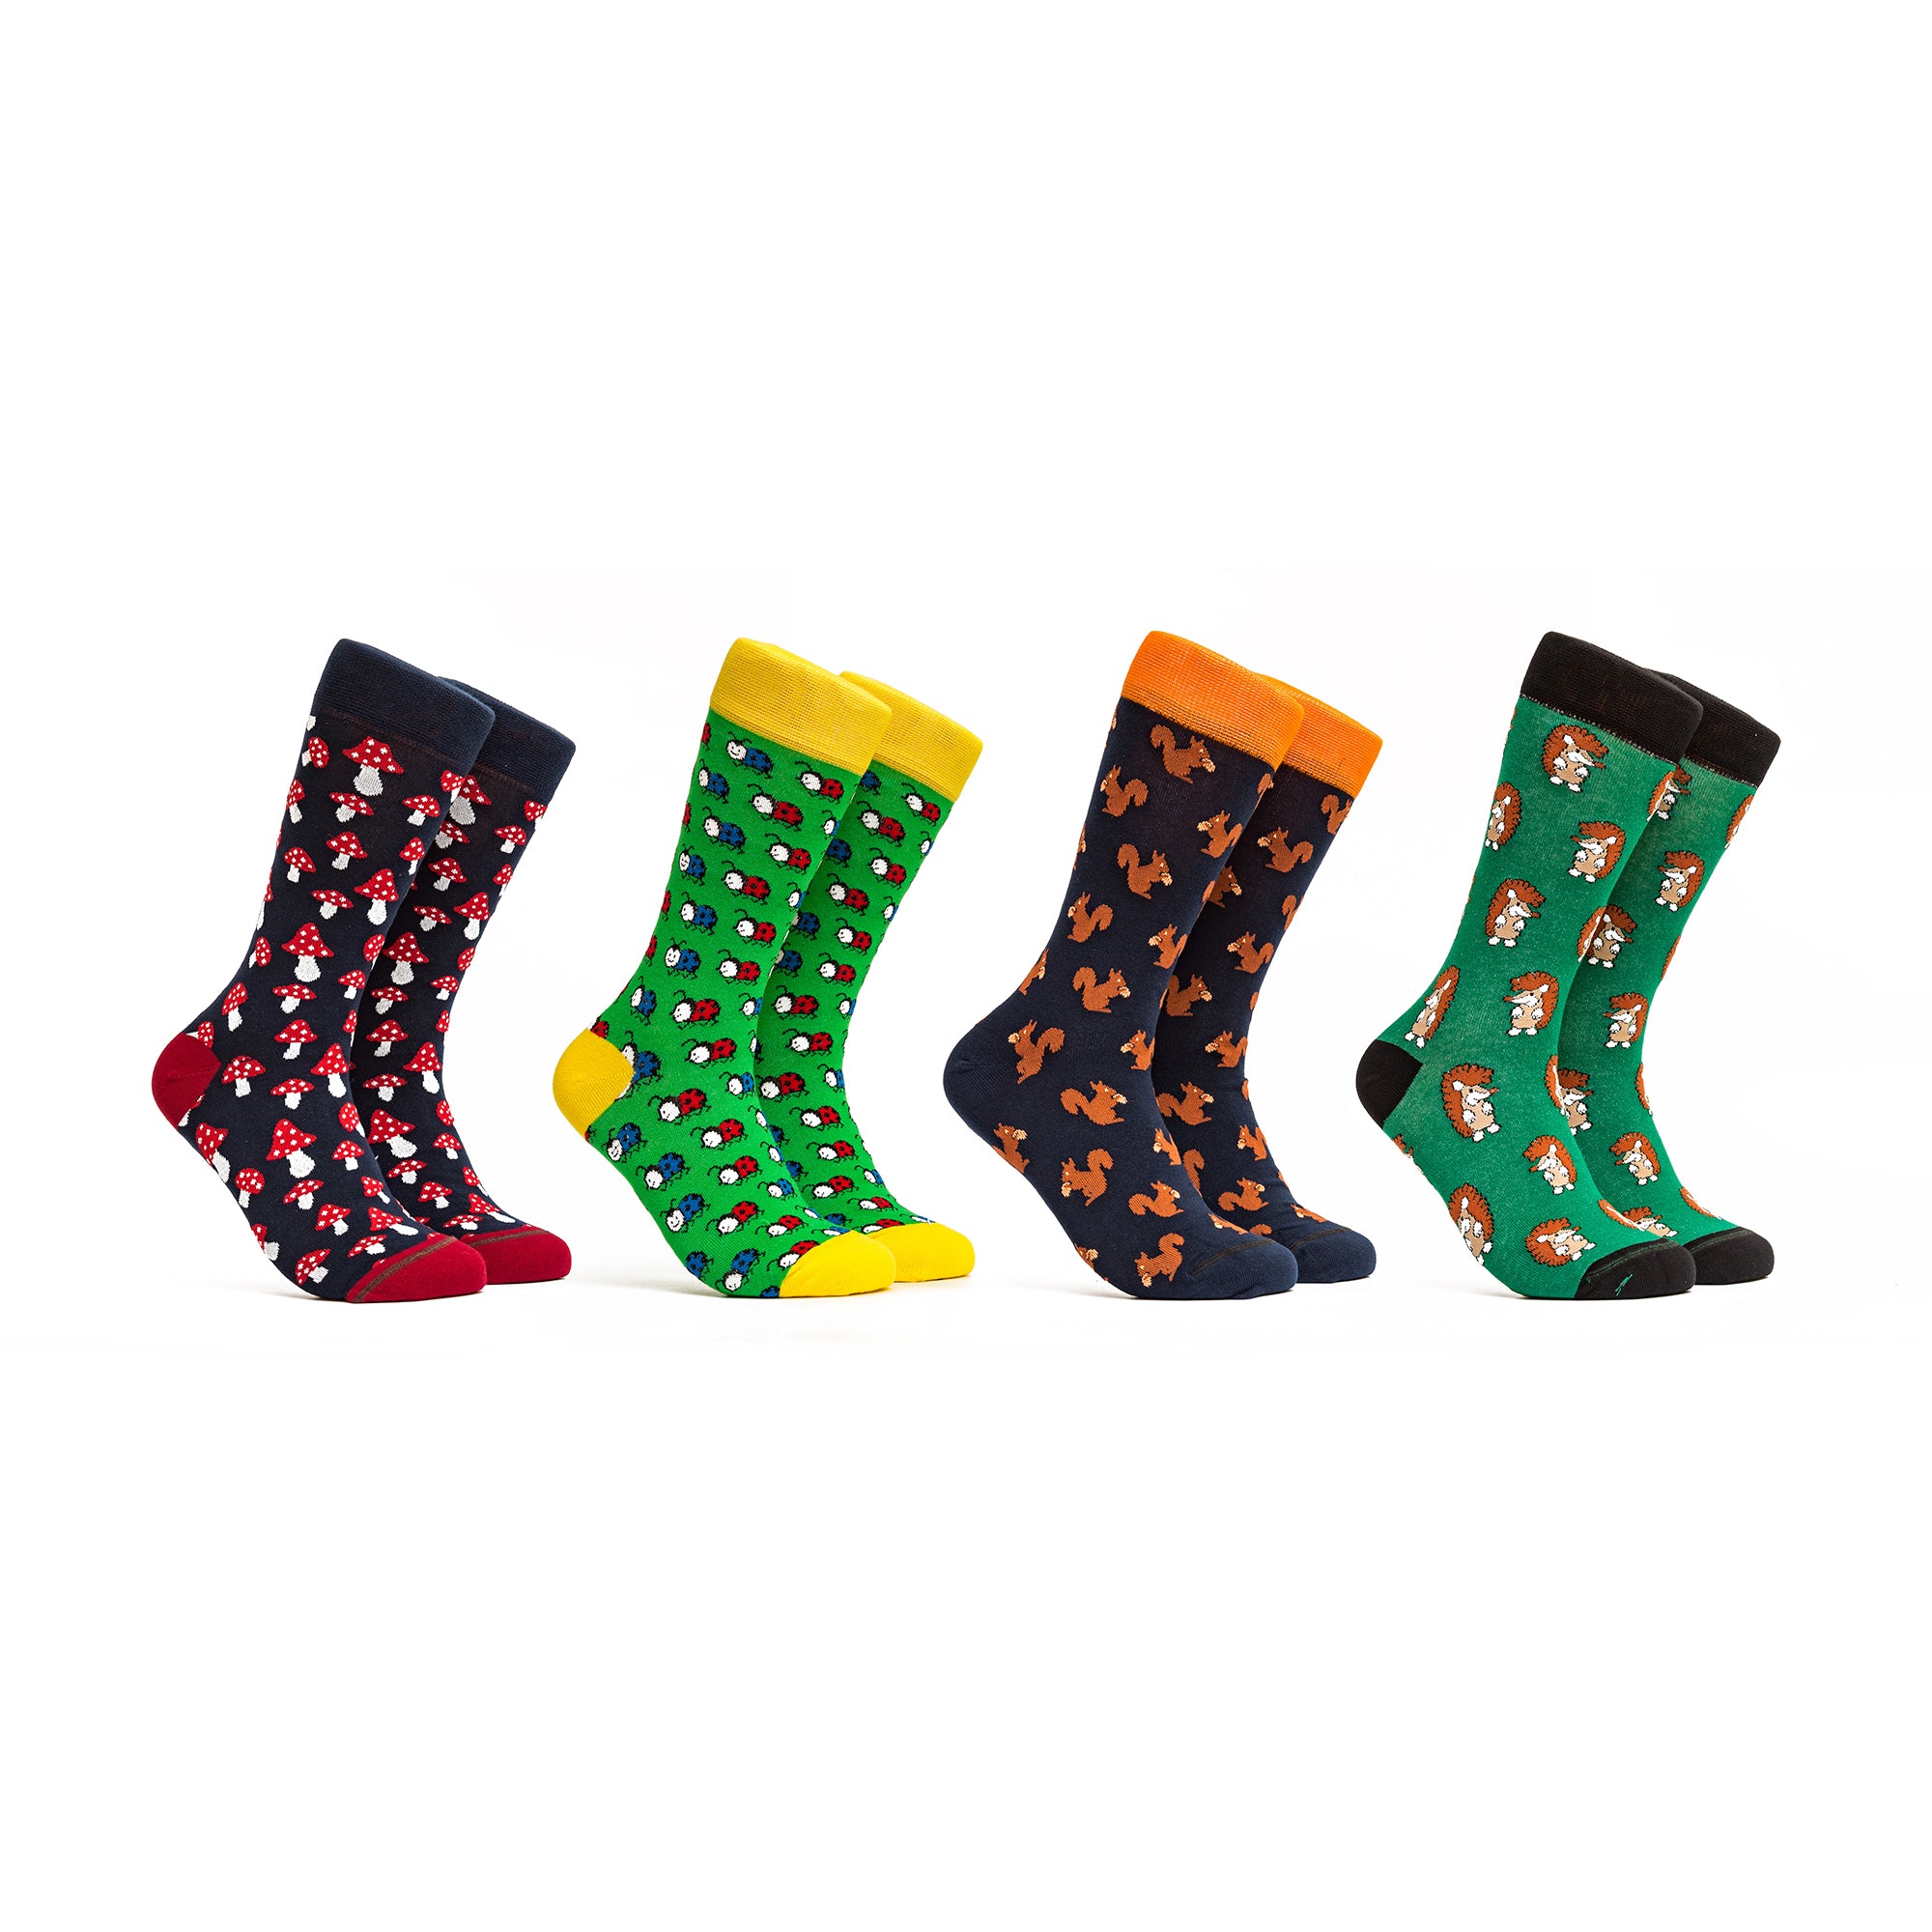 Forest Animals Combo - Colors Black, Green and Orange - 4 pairs